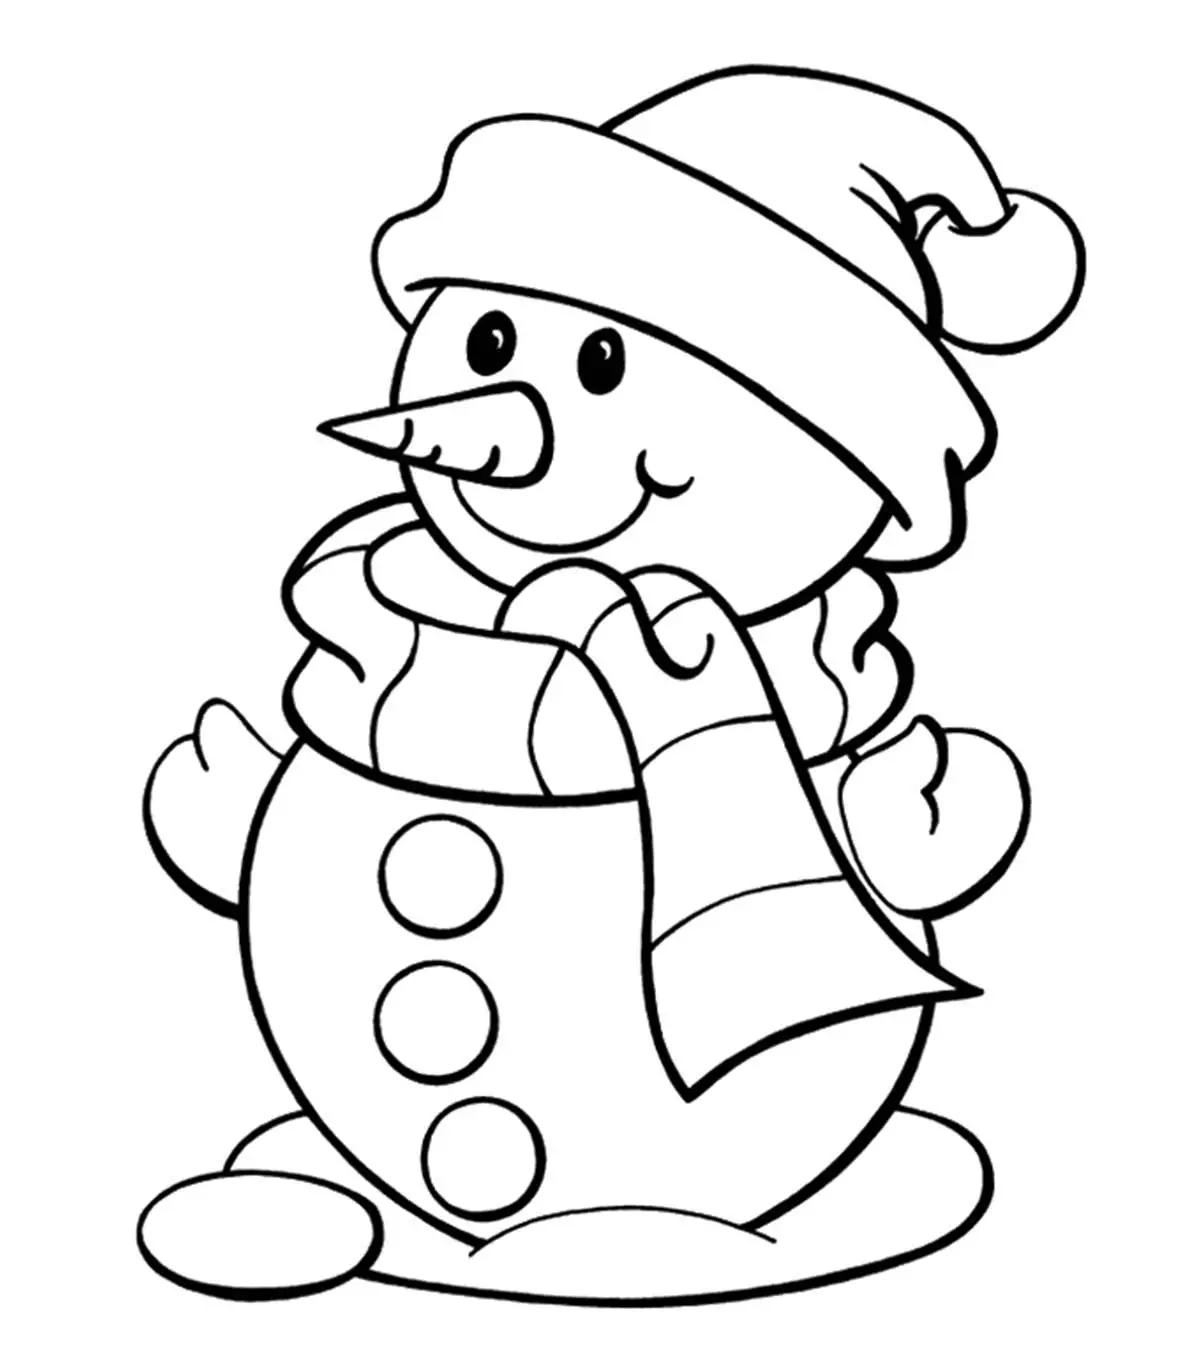 Top 24 Snowman Coloring Pages Your Toddler Will Love To Color